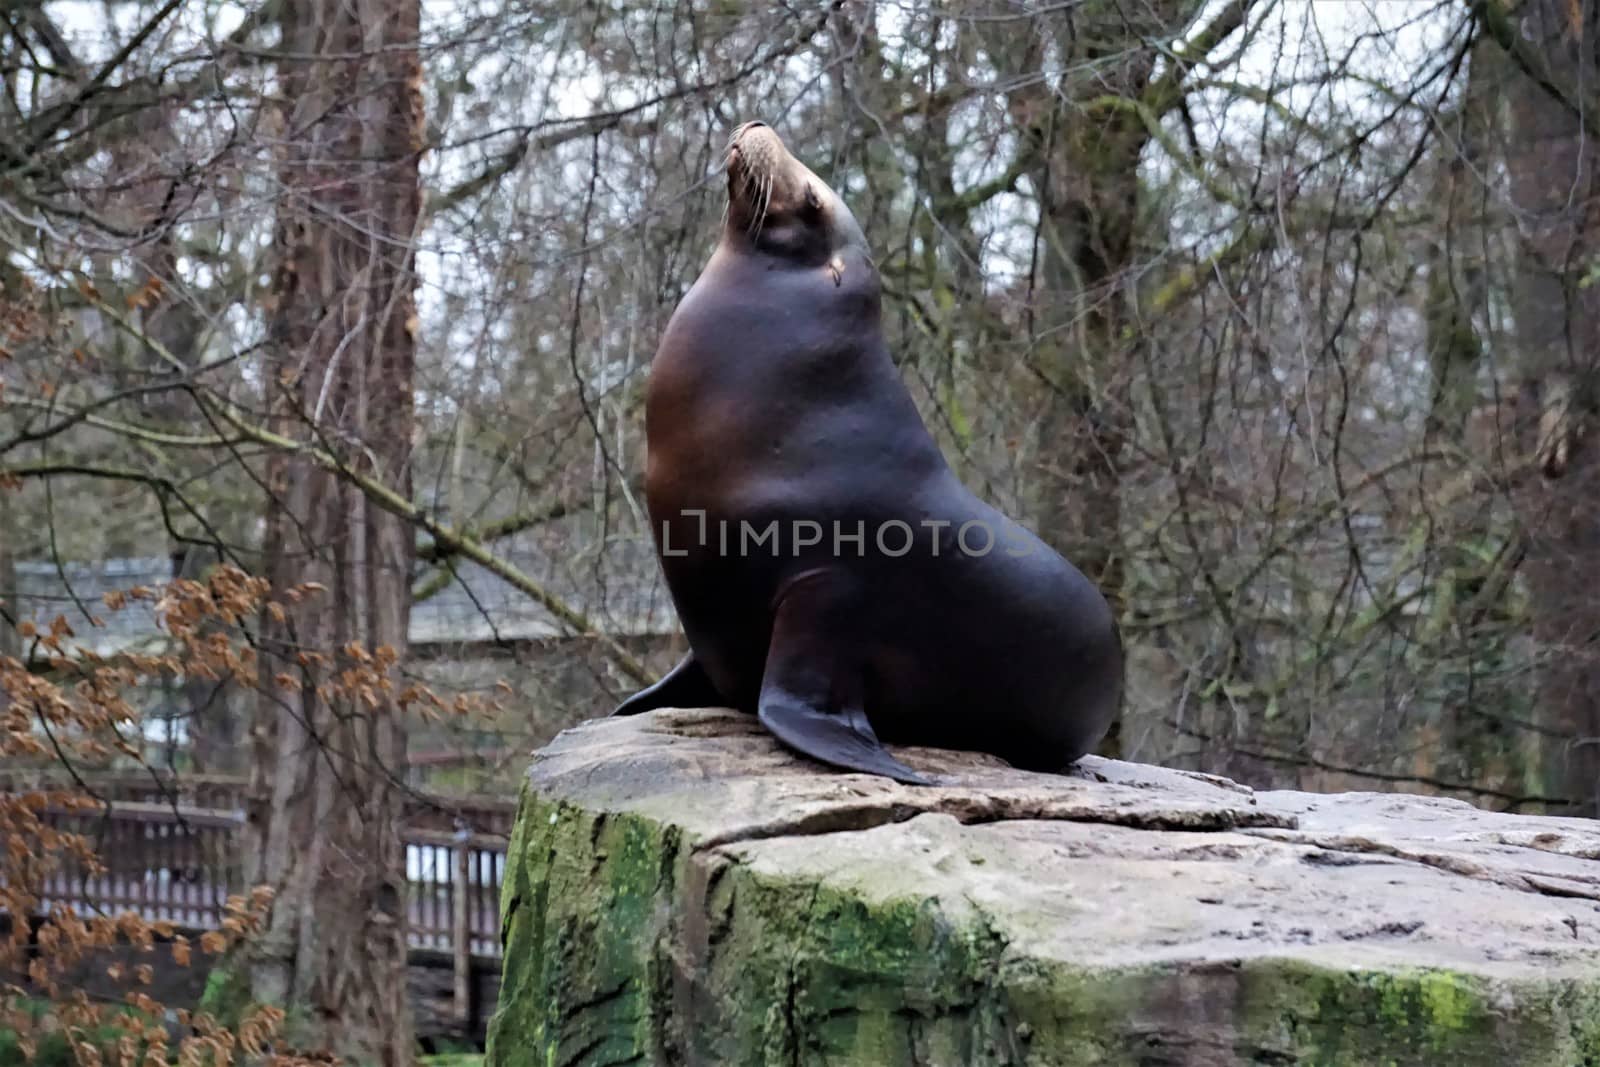 California sea lion looking cute while chilling on a rock